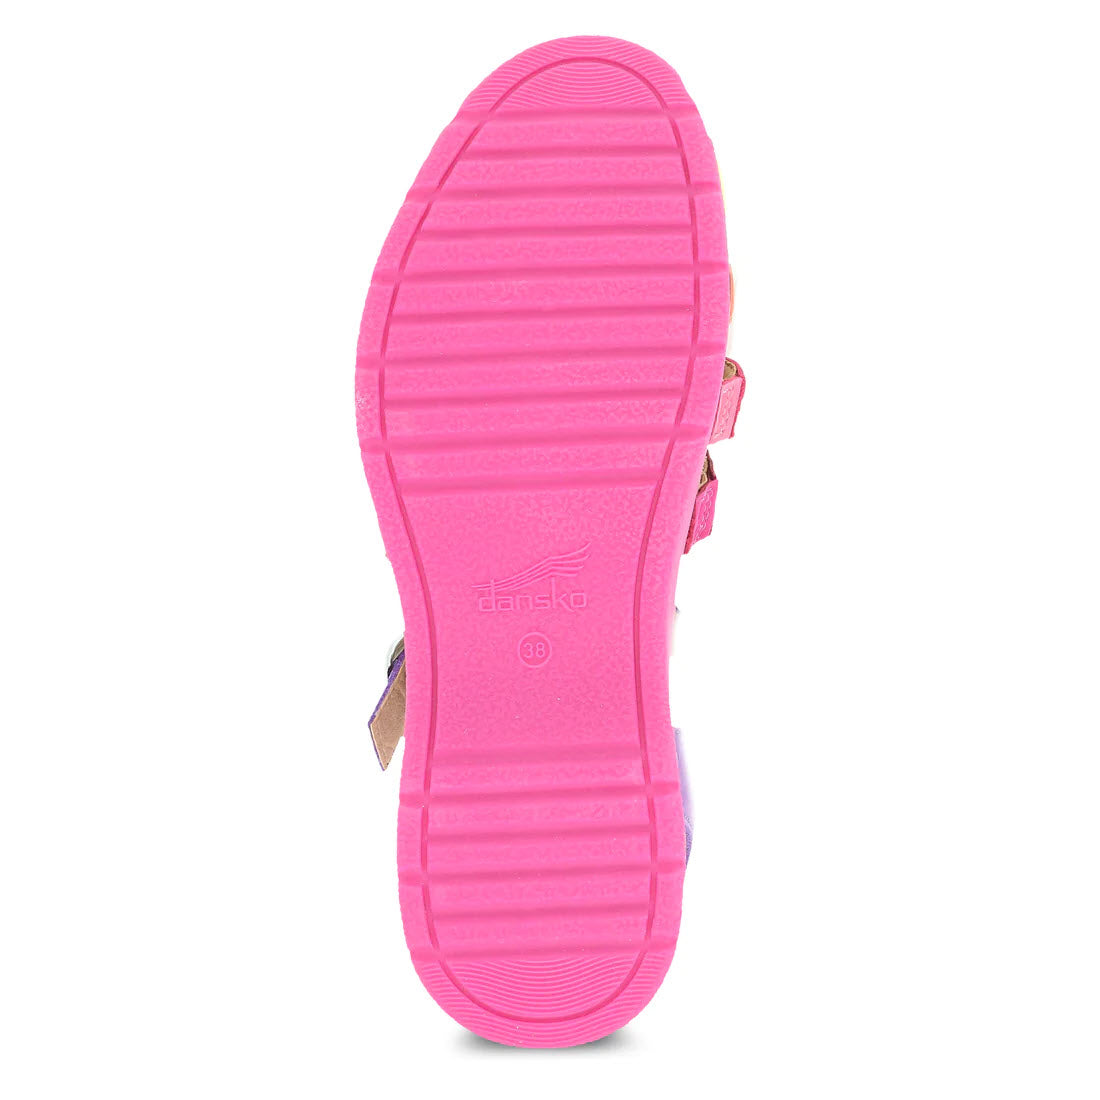 Bright pink DANSKO sole with a ribbed pattern and cute colors on the straps, featuring a visible Dansko logo embossed near the heel.